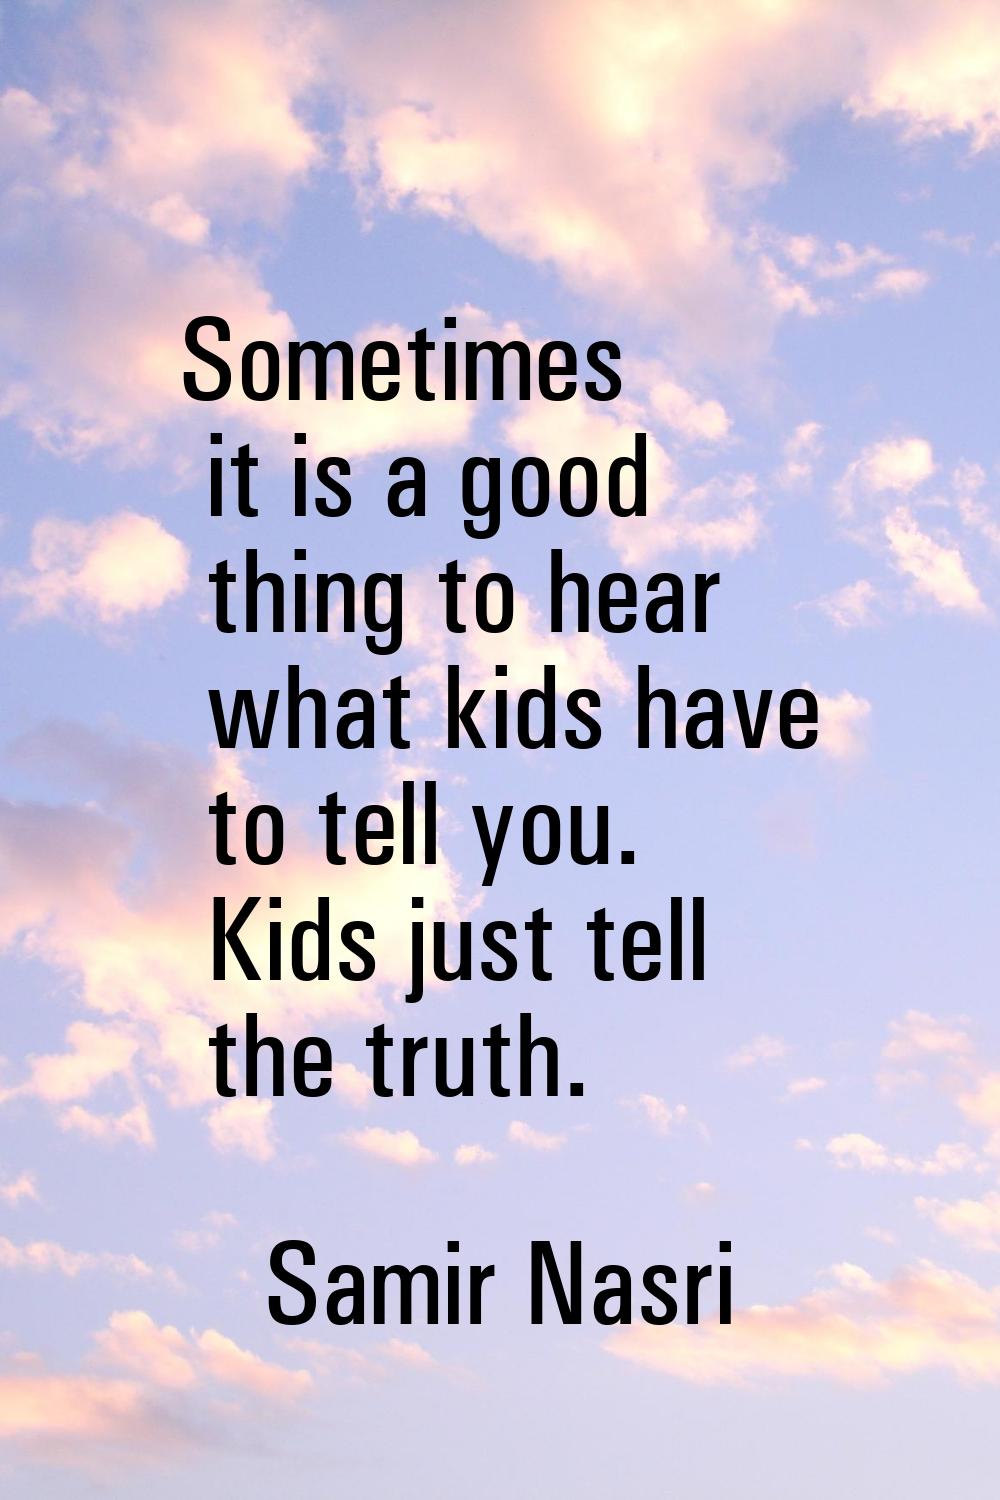 Sometimes it is a good thing to hear what kids have to tell you. Kids just tell the truth.